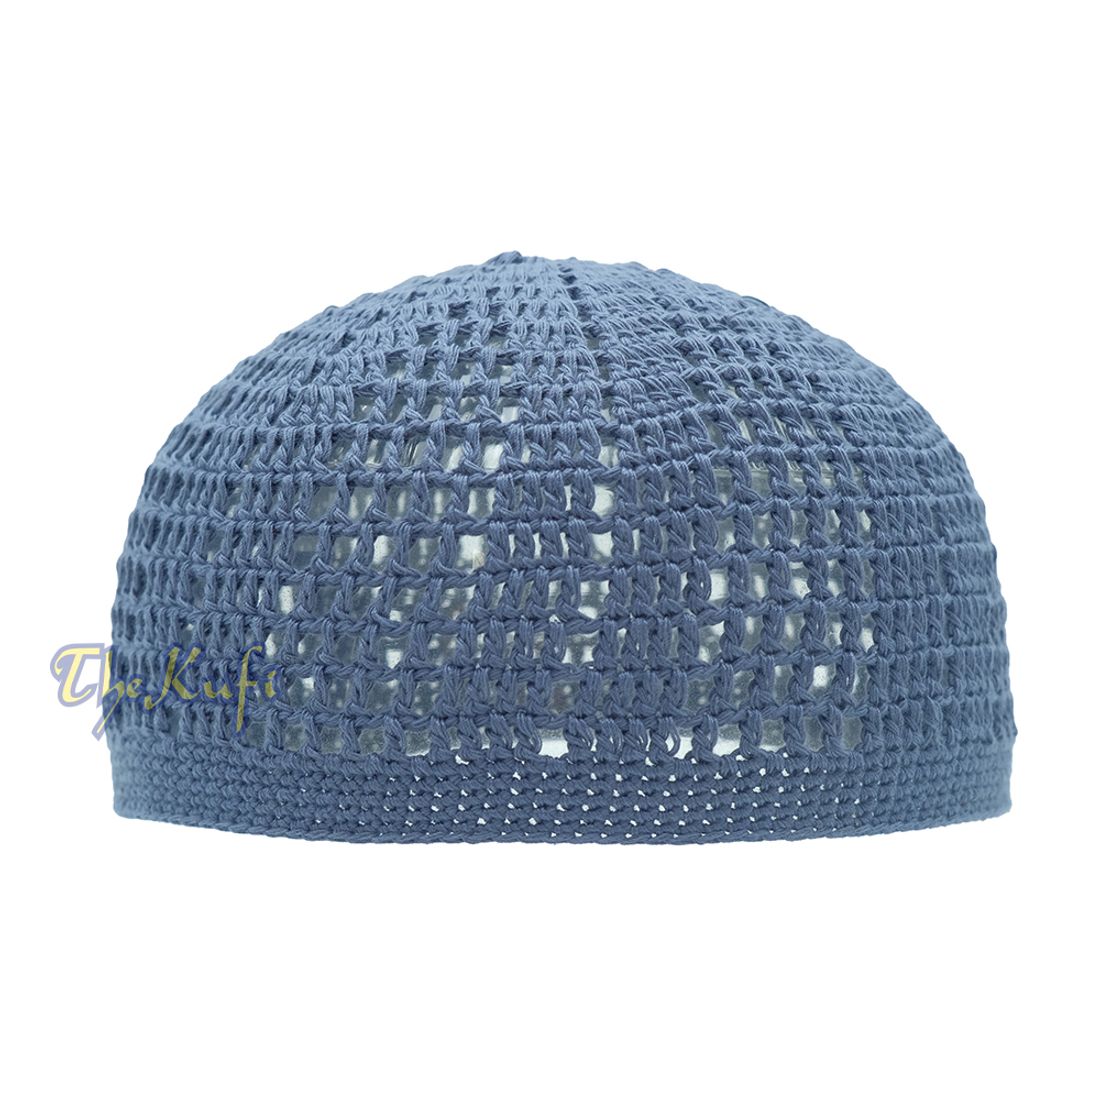 Cotton Pigeon Blue Tight & Loose Weave Design Crochet Knit Head Cover Kufi